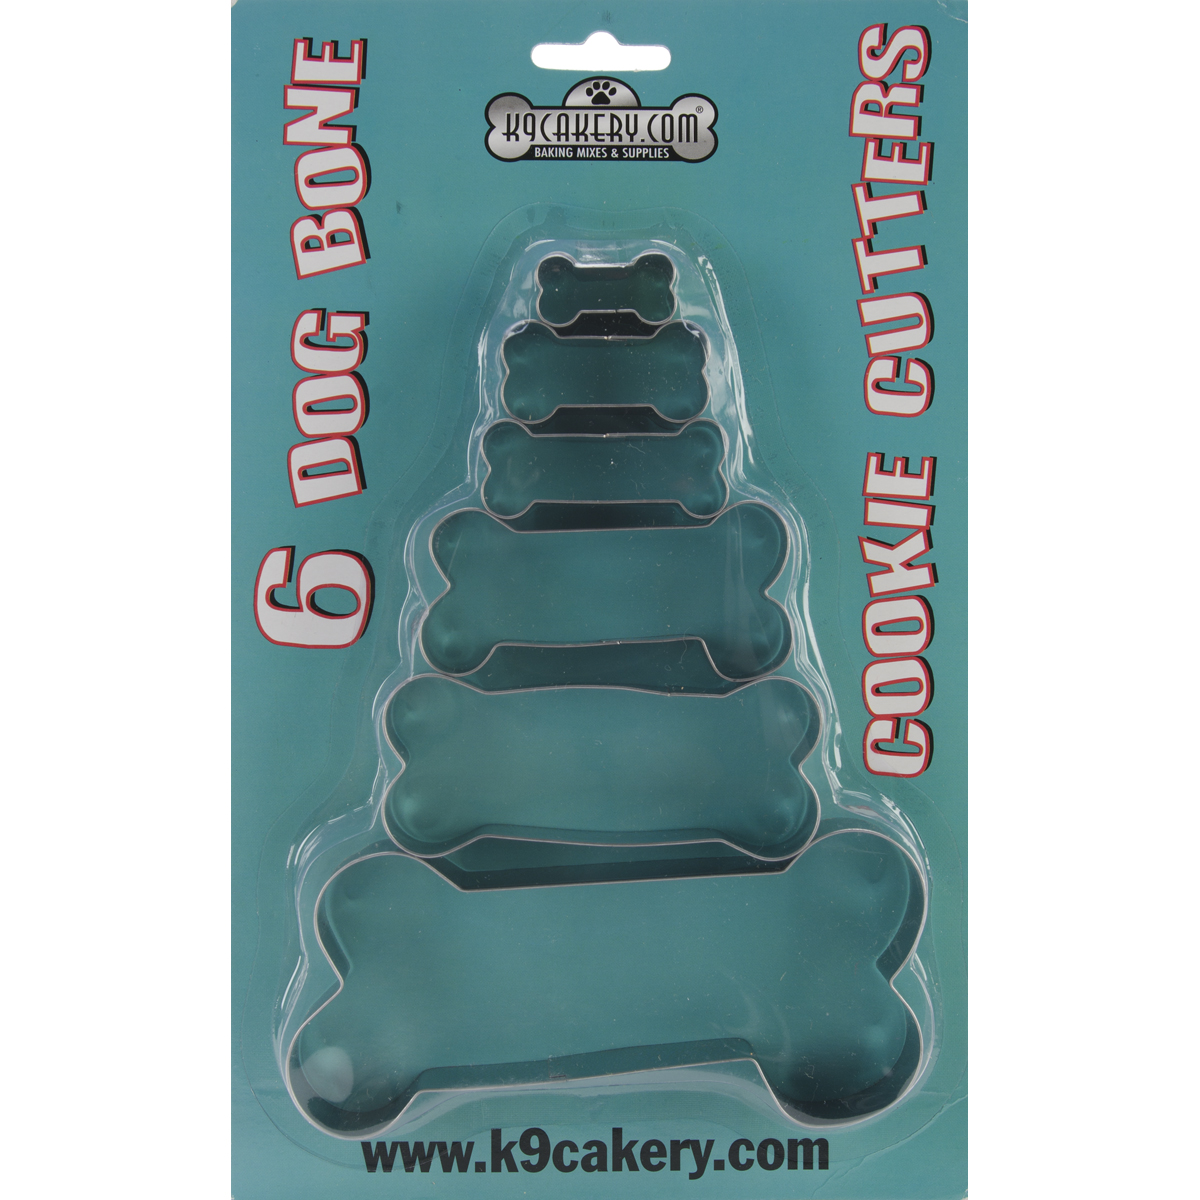 Cookie Cutters 6/Pkg - image 1 of 2